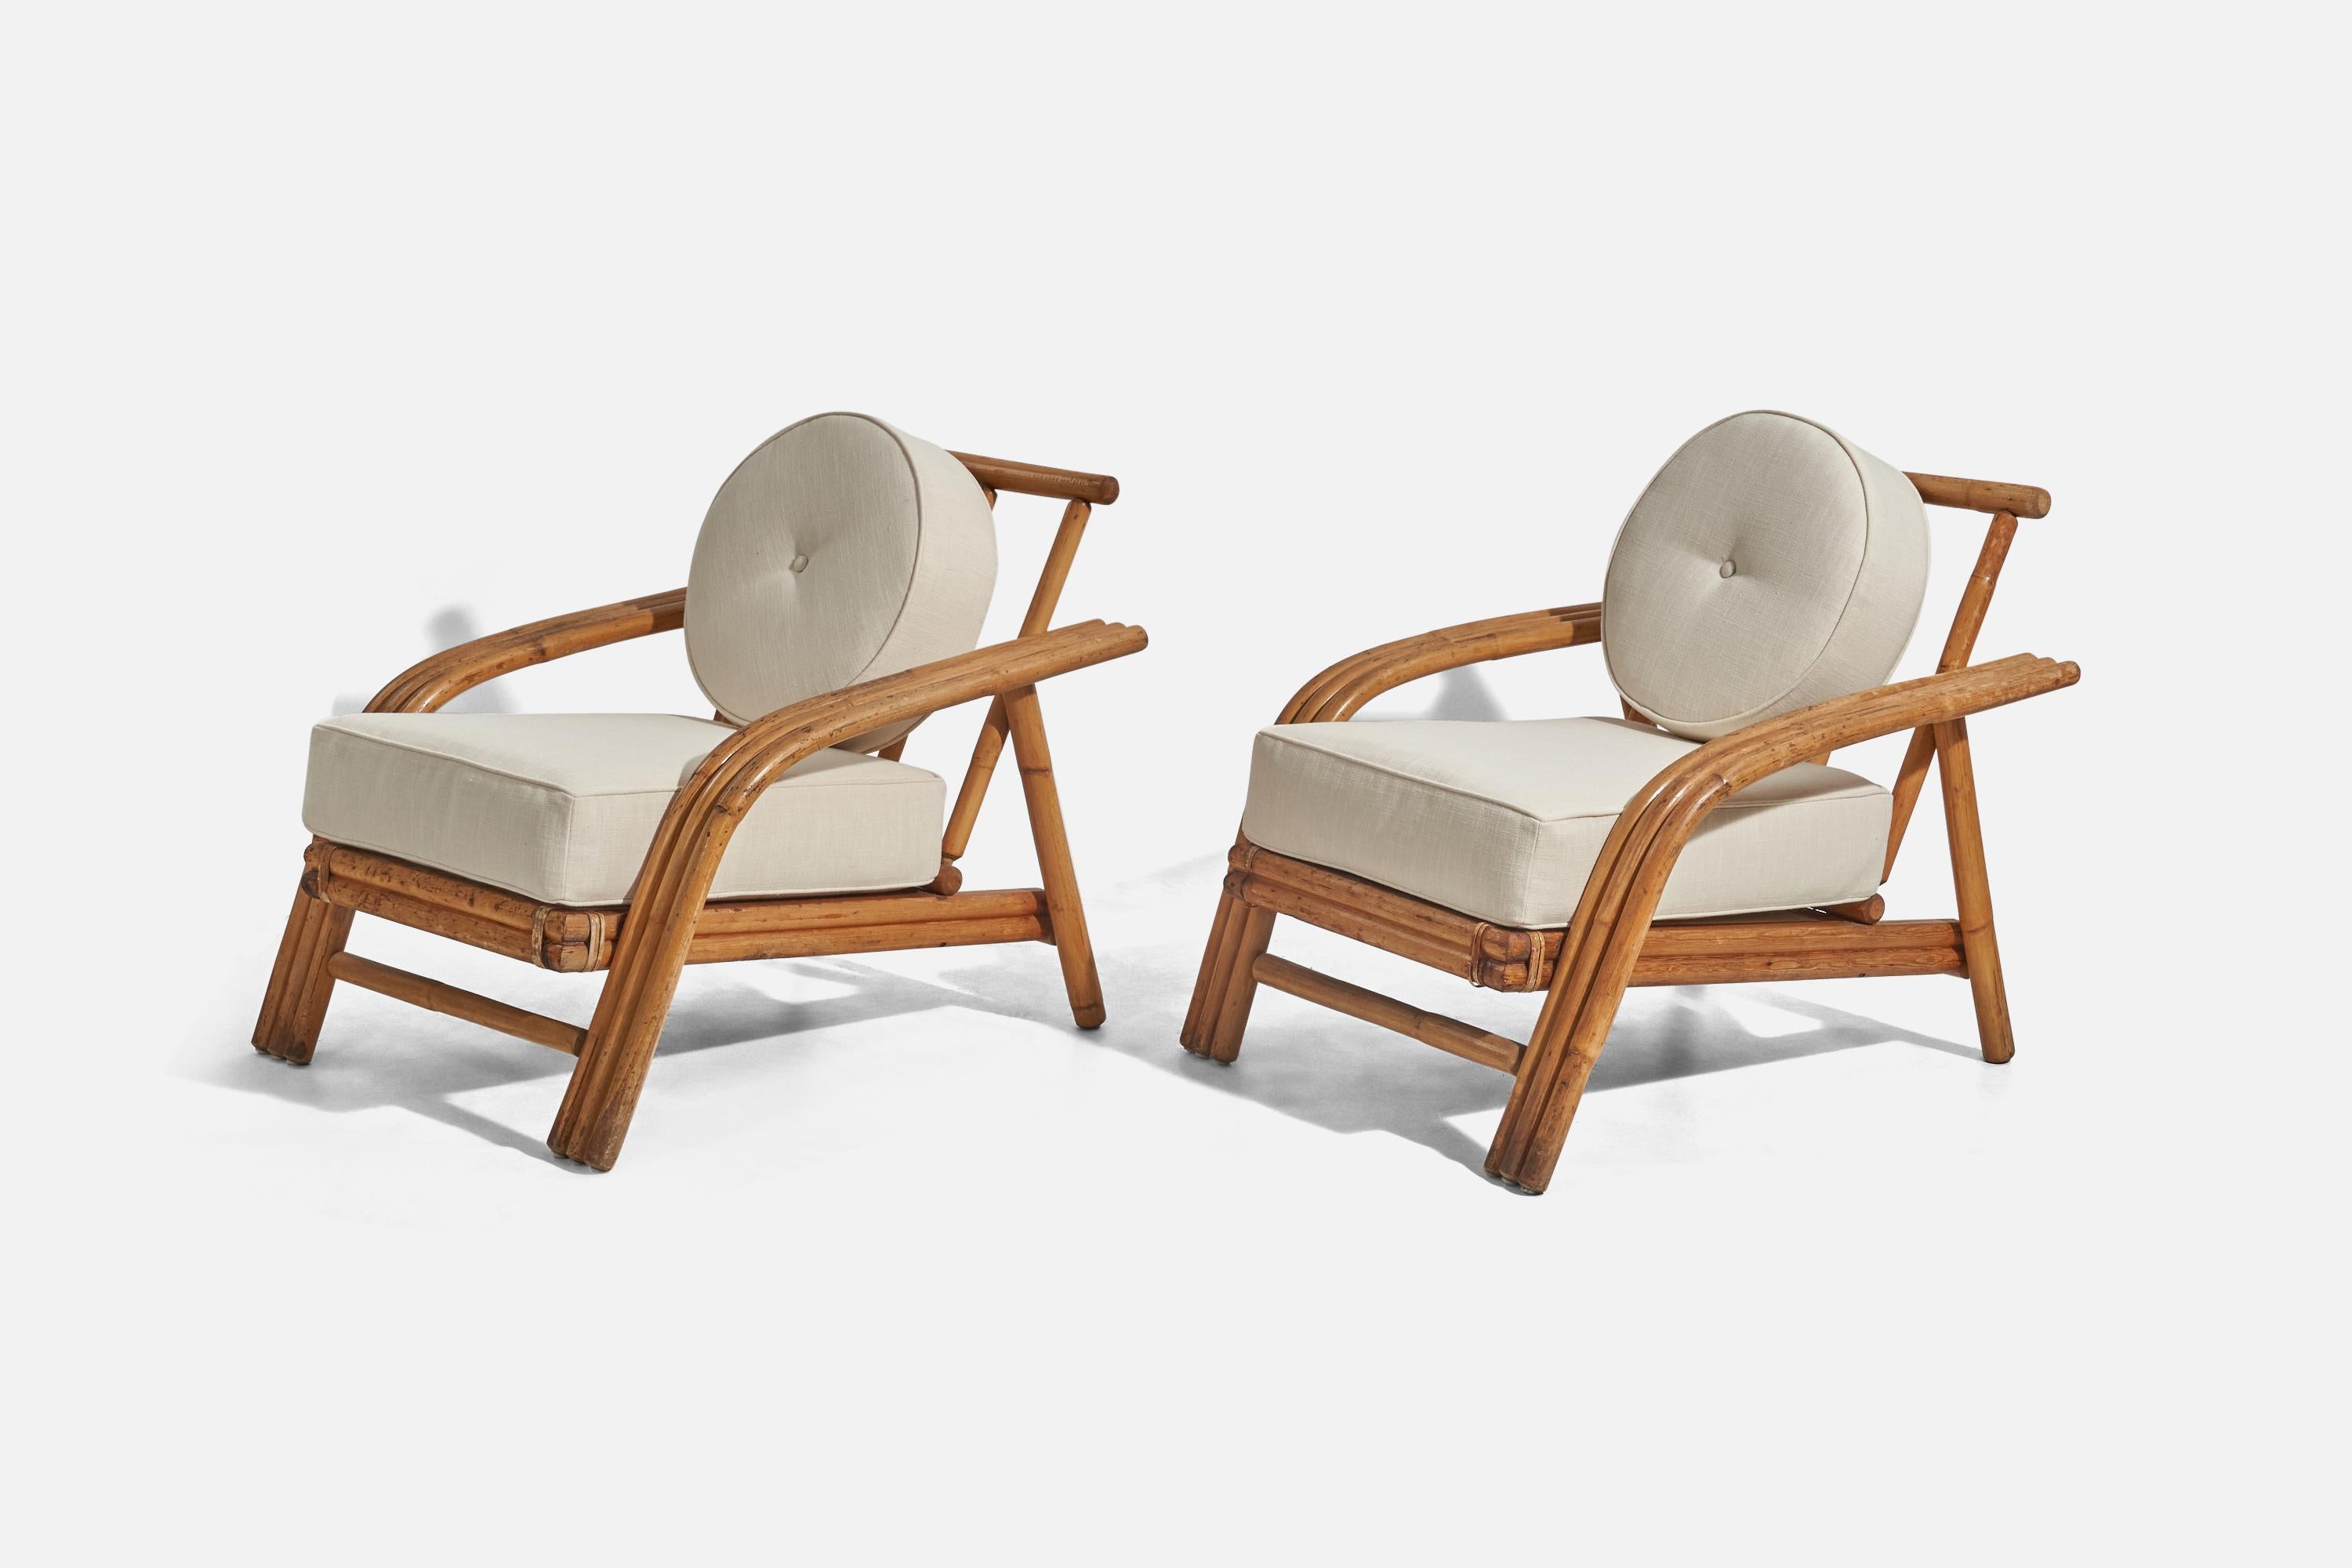 A pair of white fabric and bamboo lounge chairs designed and produced by an American designer, United States, 1950s.




